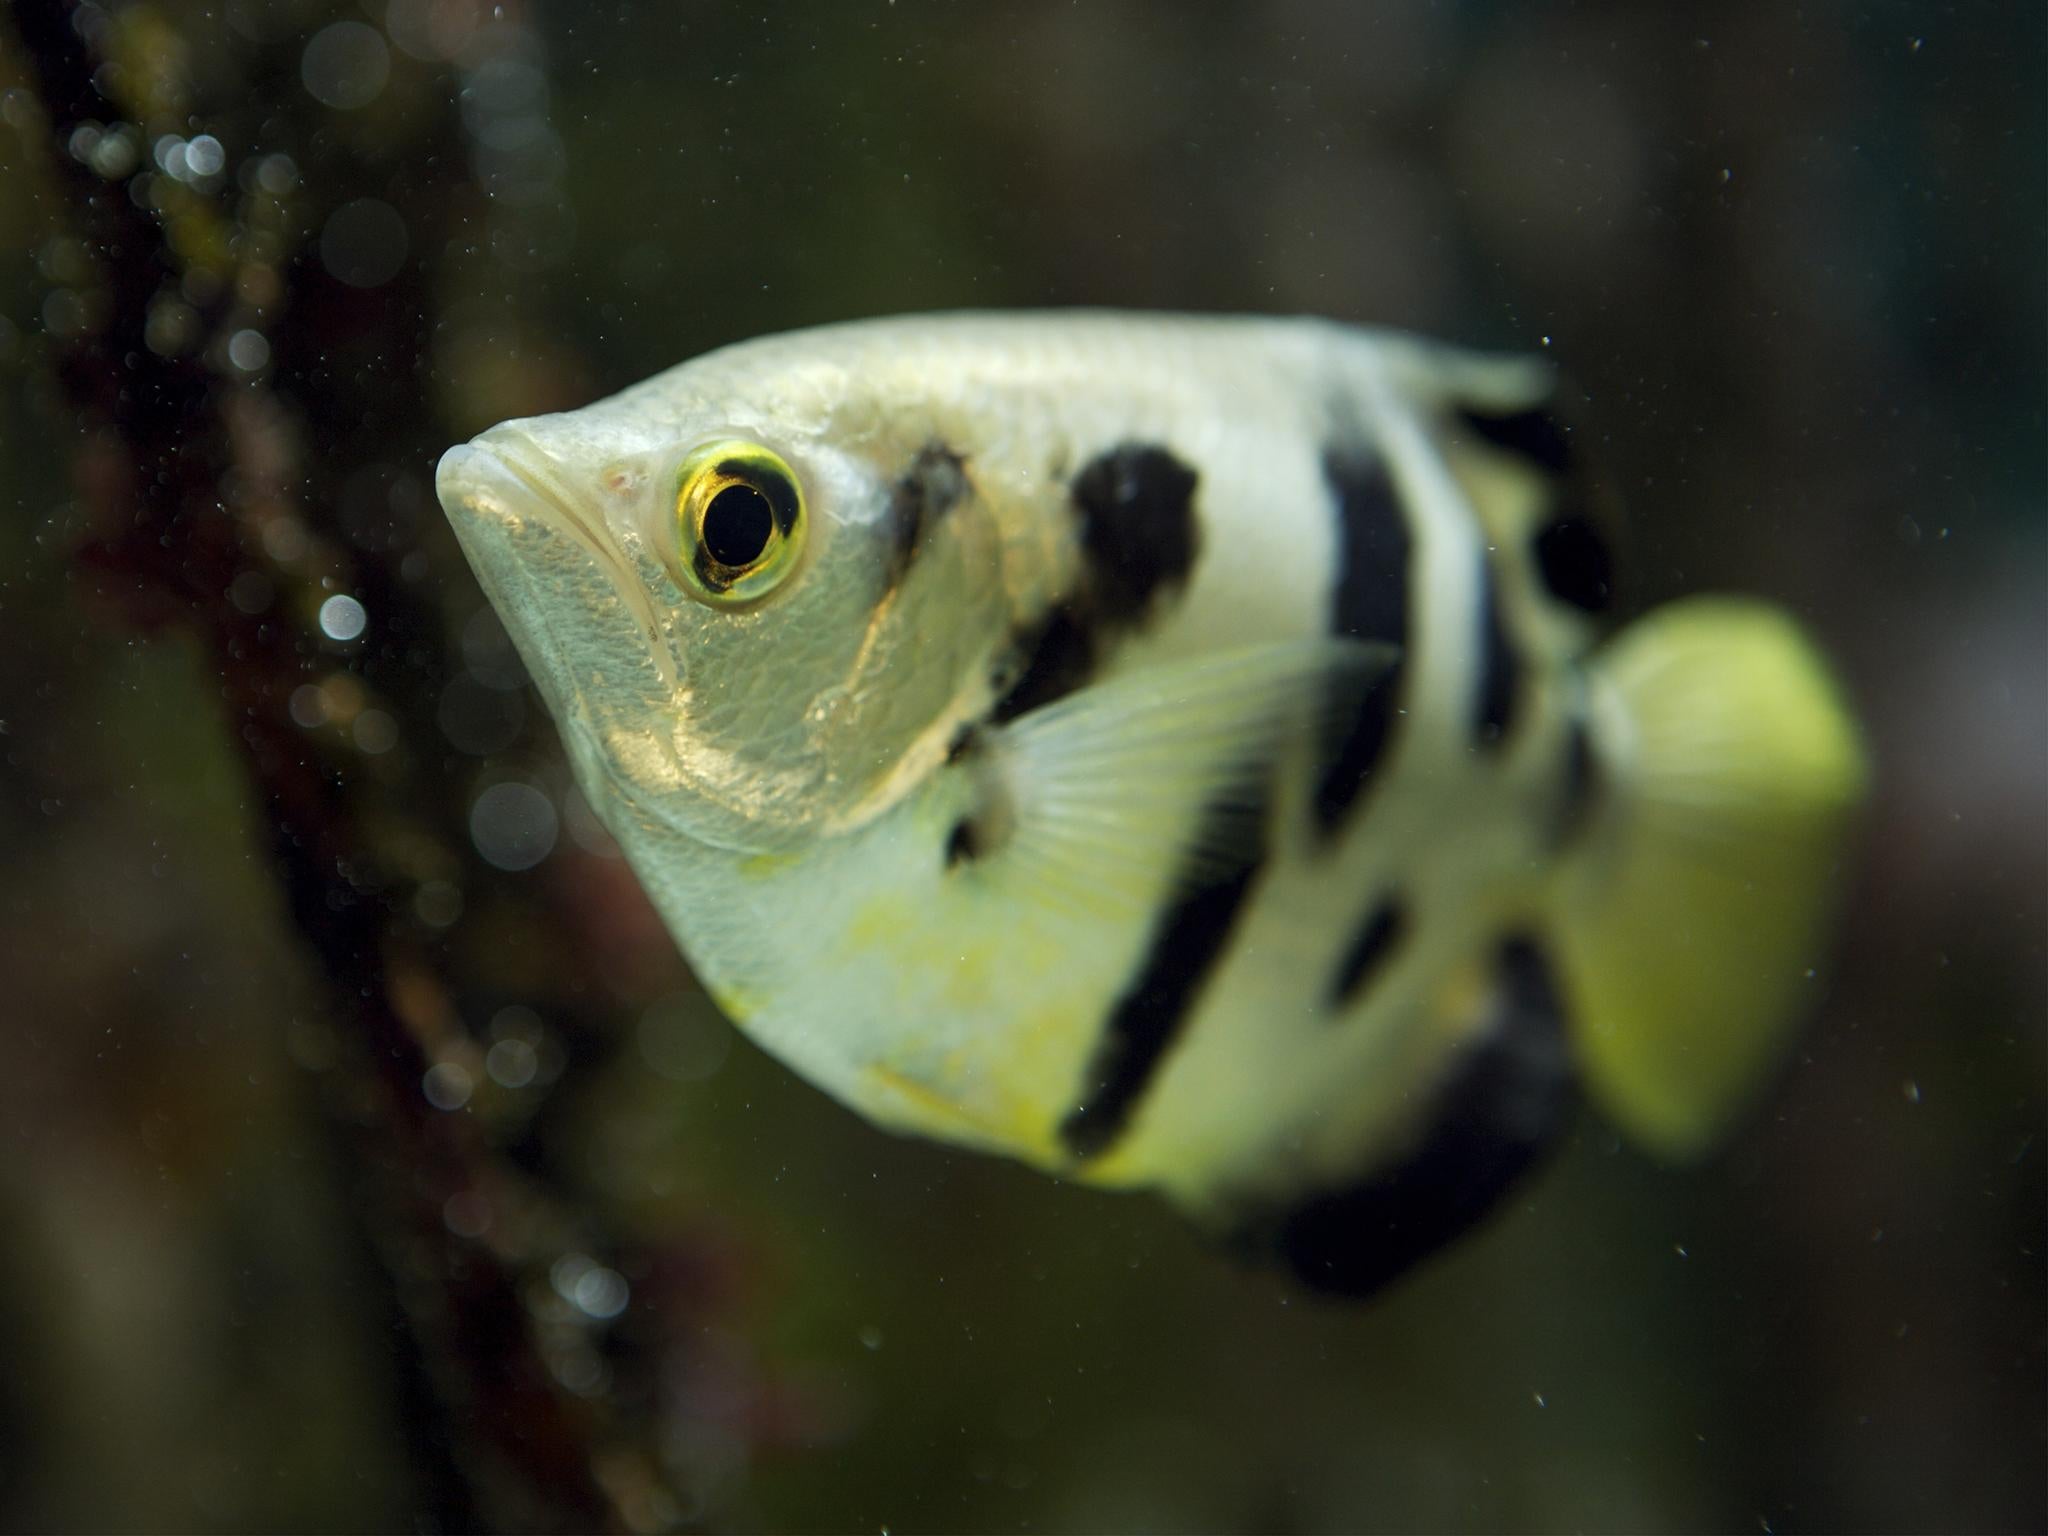 Archerfish spit at their prey, and spitted water at the images to separate them